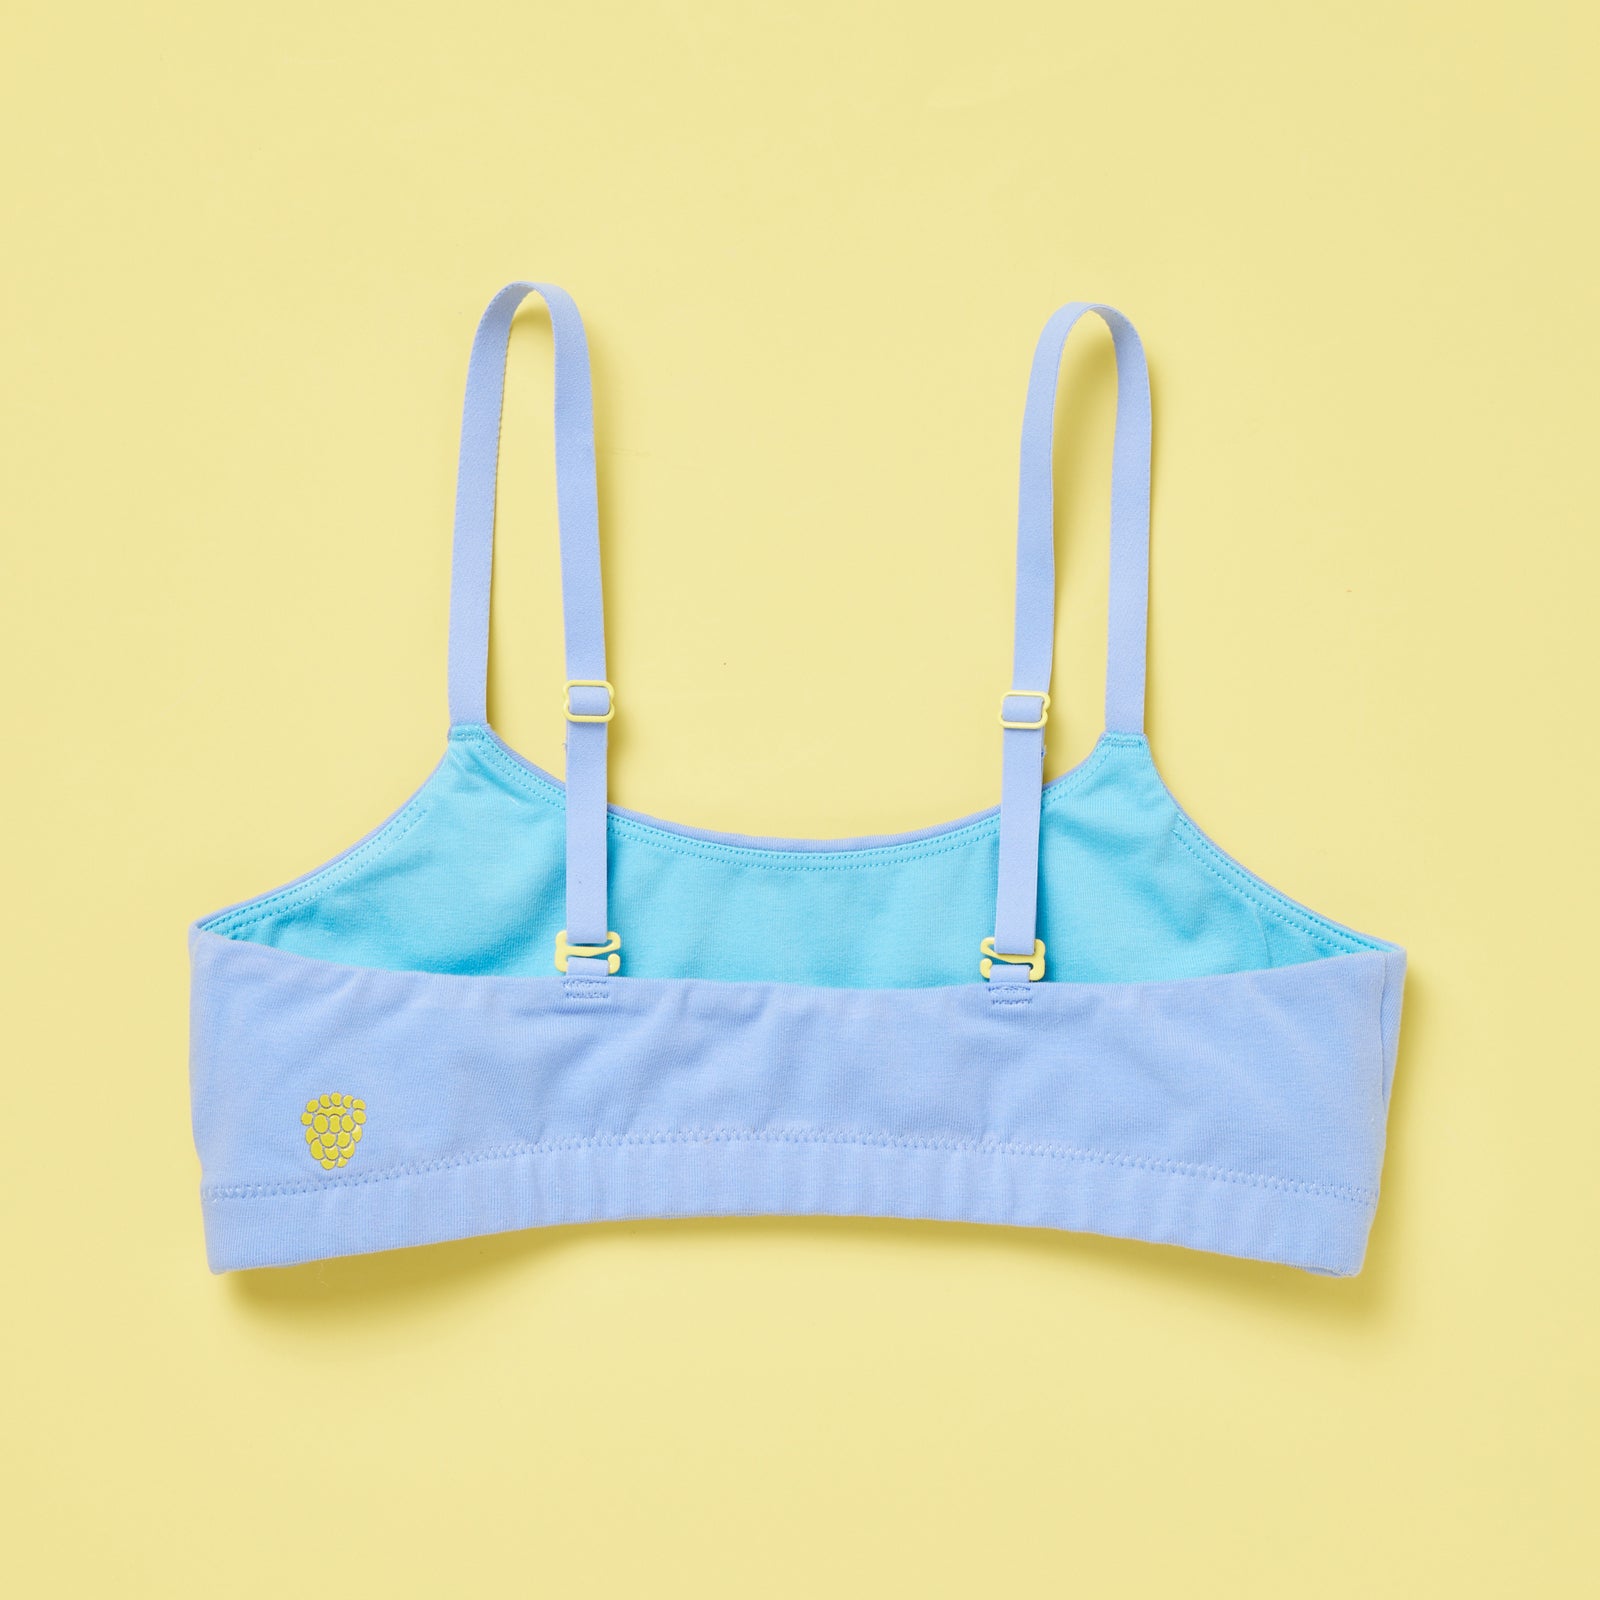 Yellowberry Girls' Super Soft Cotton First Training Bra with Convertible  Straps - X Small, White Iceberg